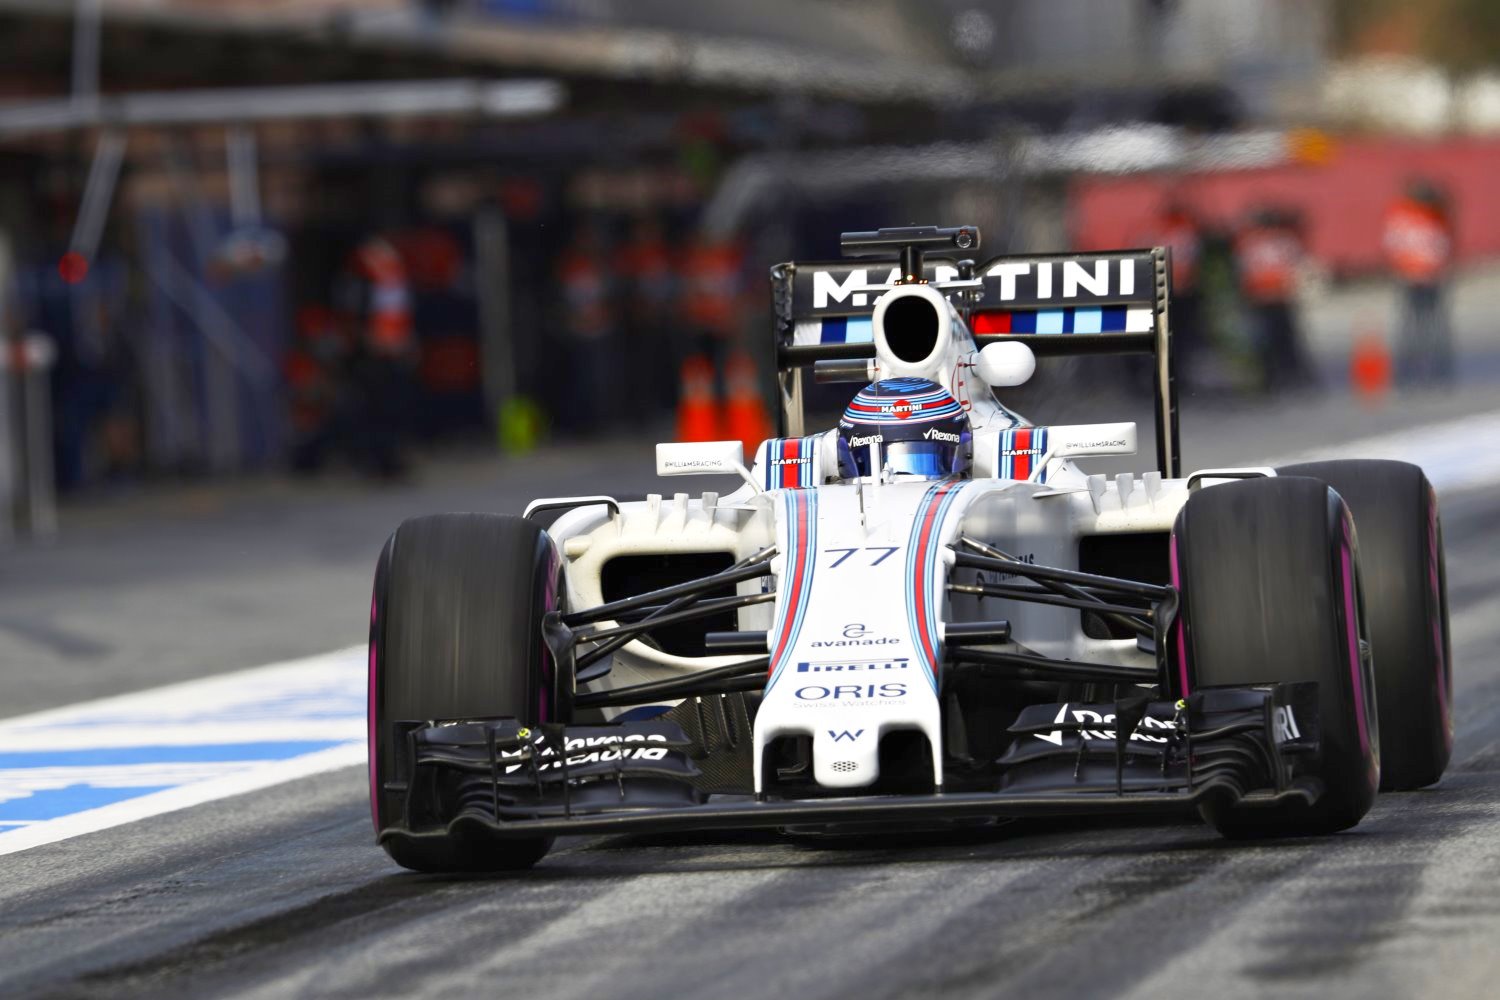 The powerful Mercedes engine will help Williams on Montreal's long straights